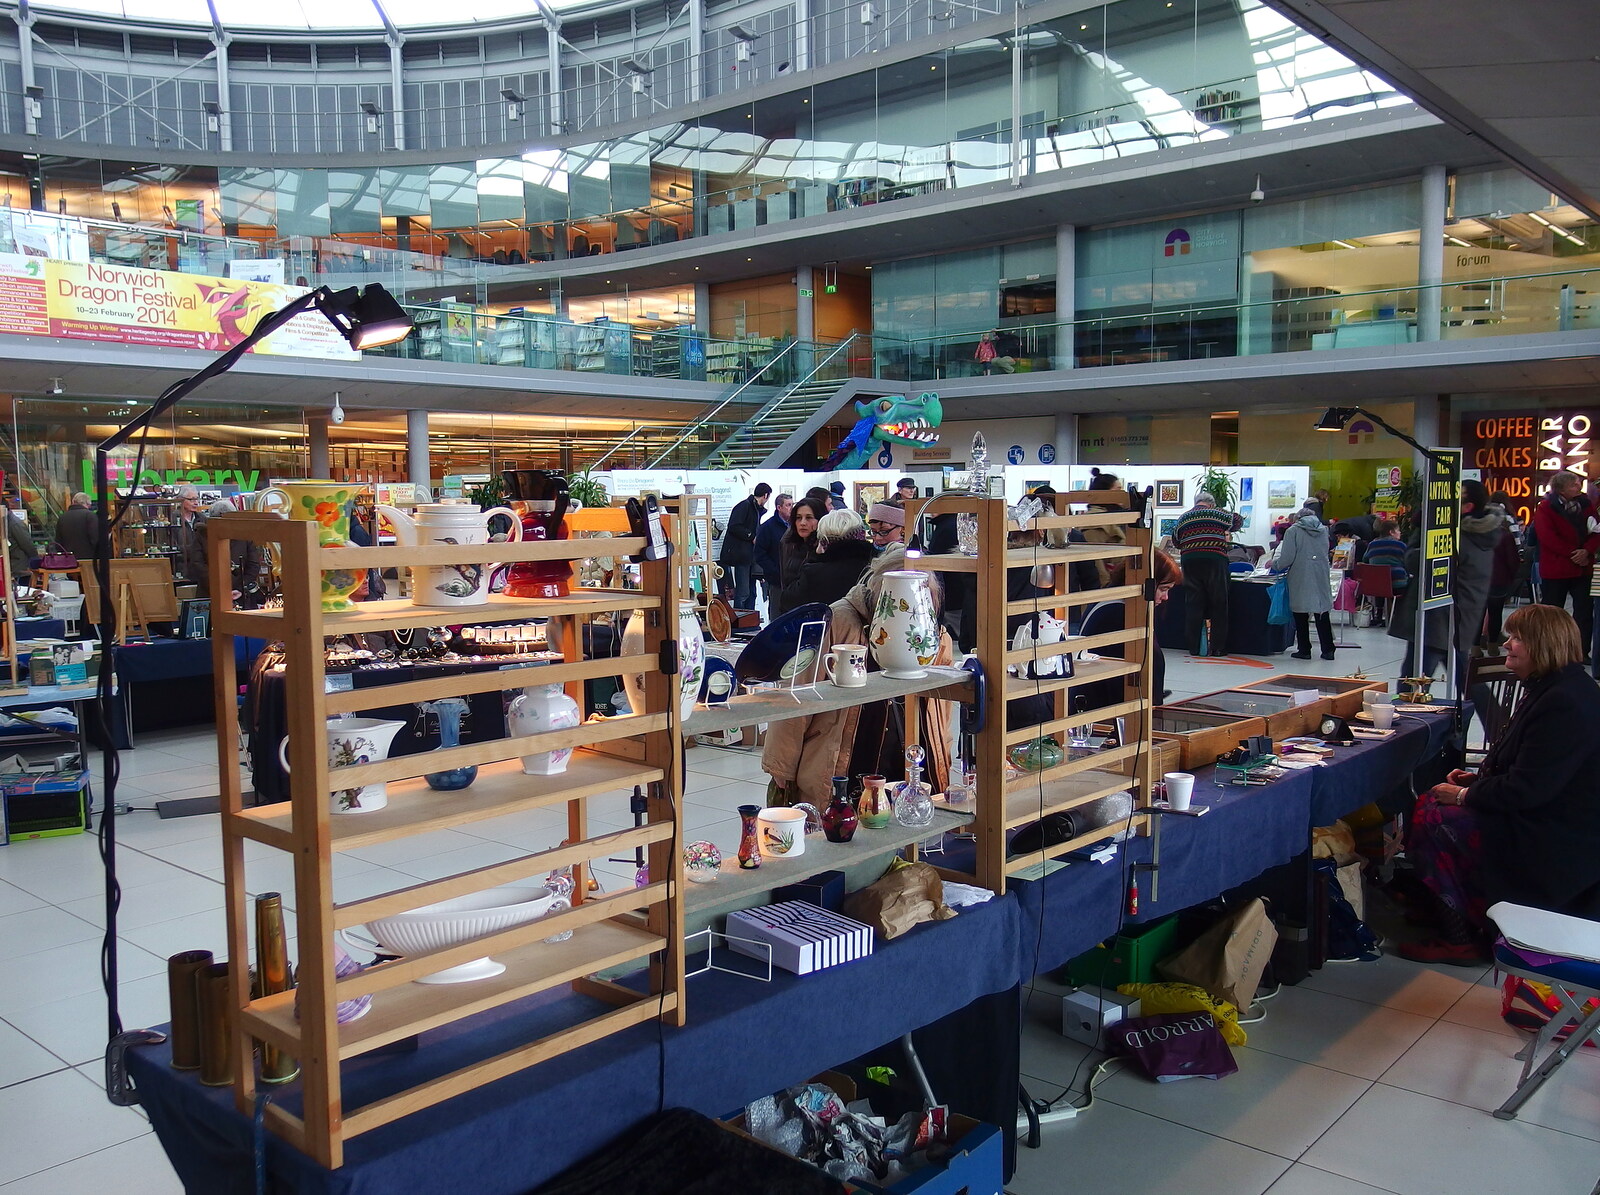 There's a craft fair inside the Forum from A Dragoney Sort of Day, Norwich, Norfolk - 15th February 2014